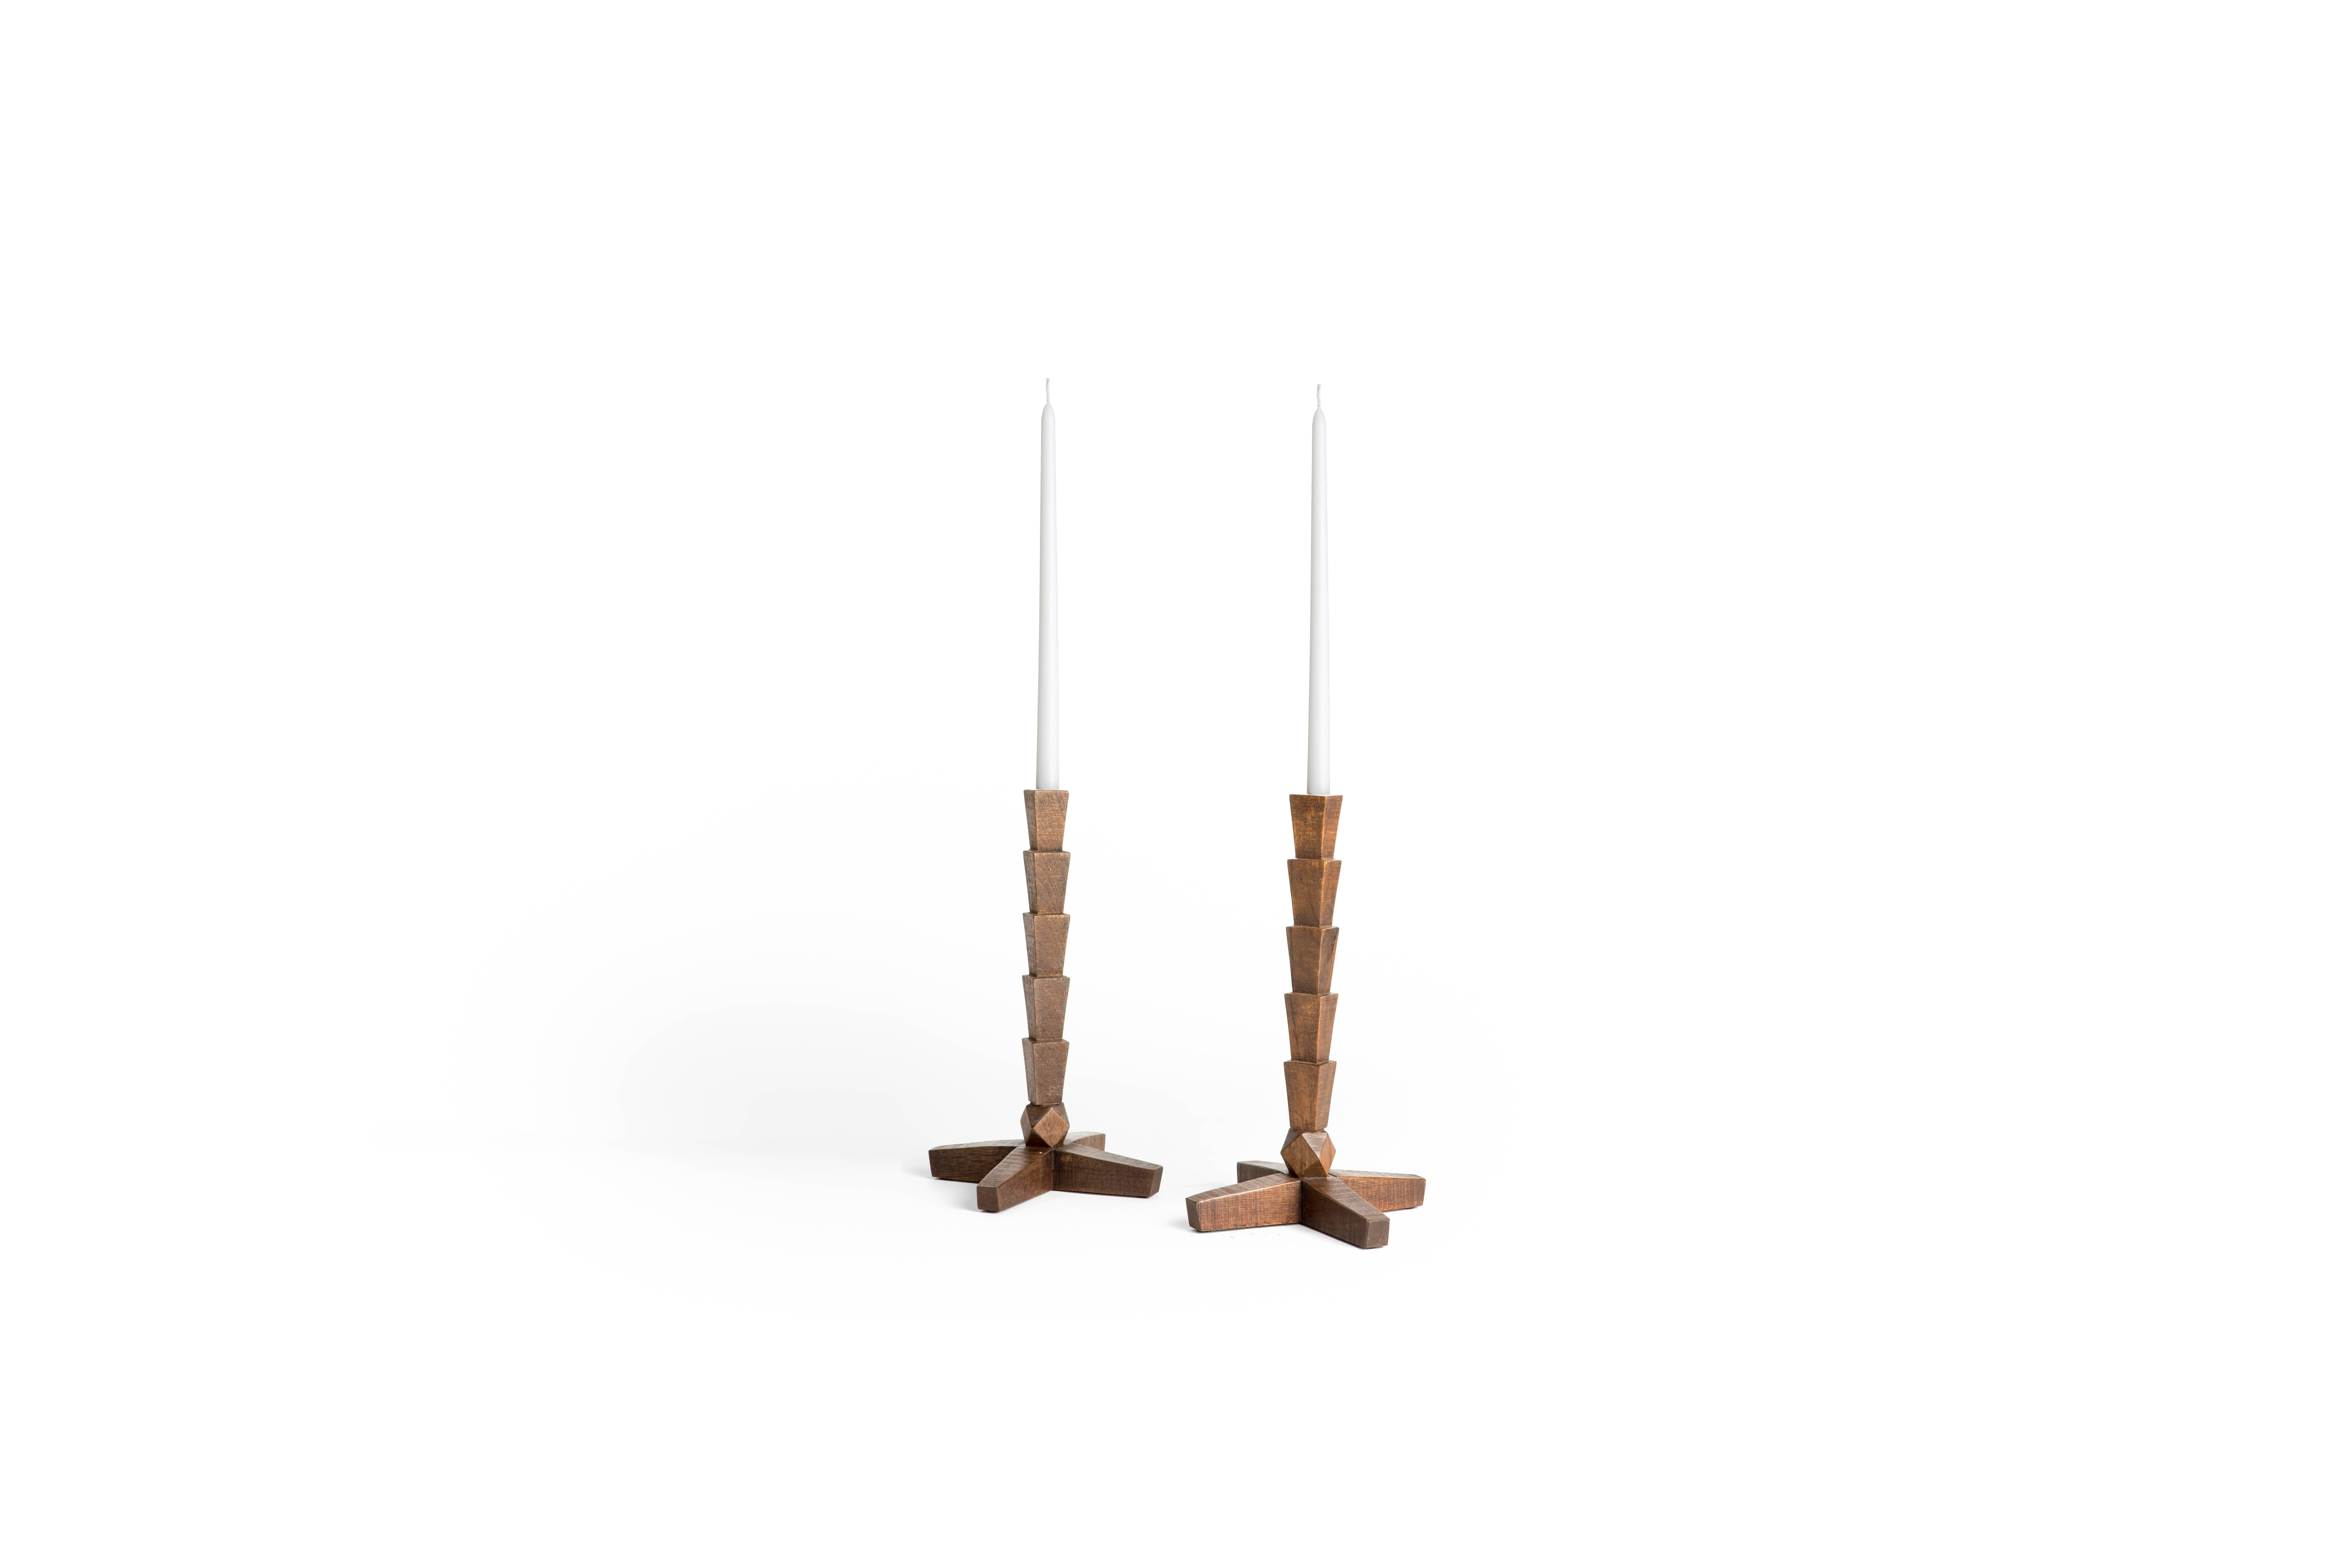 Made from white oak with a dark stain, this is a unique edition from Erik Gustafson. Candlesticks built for tiny tapered sized candles, appropriate candle spec will be provided. 

Gustafson’s inspiration stems from a love of the history of art,